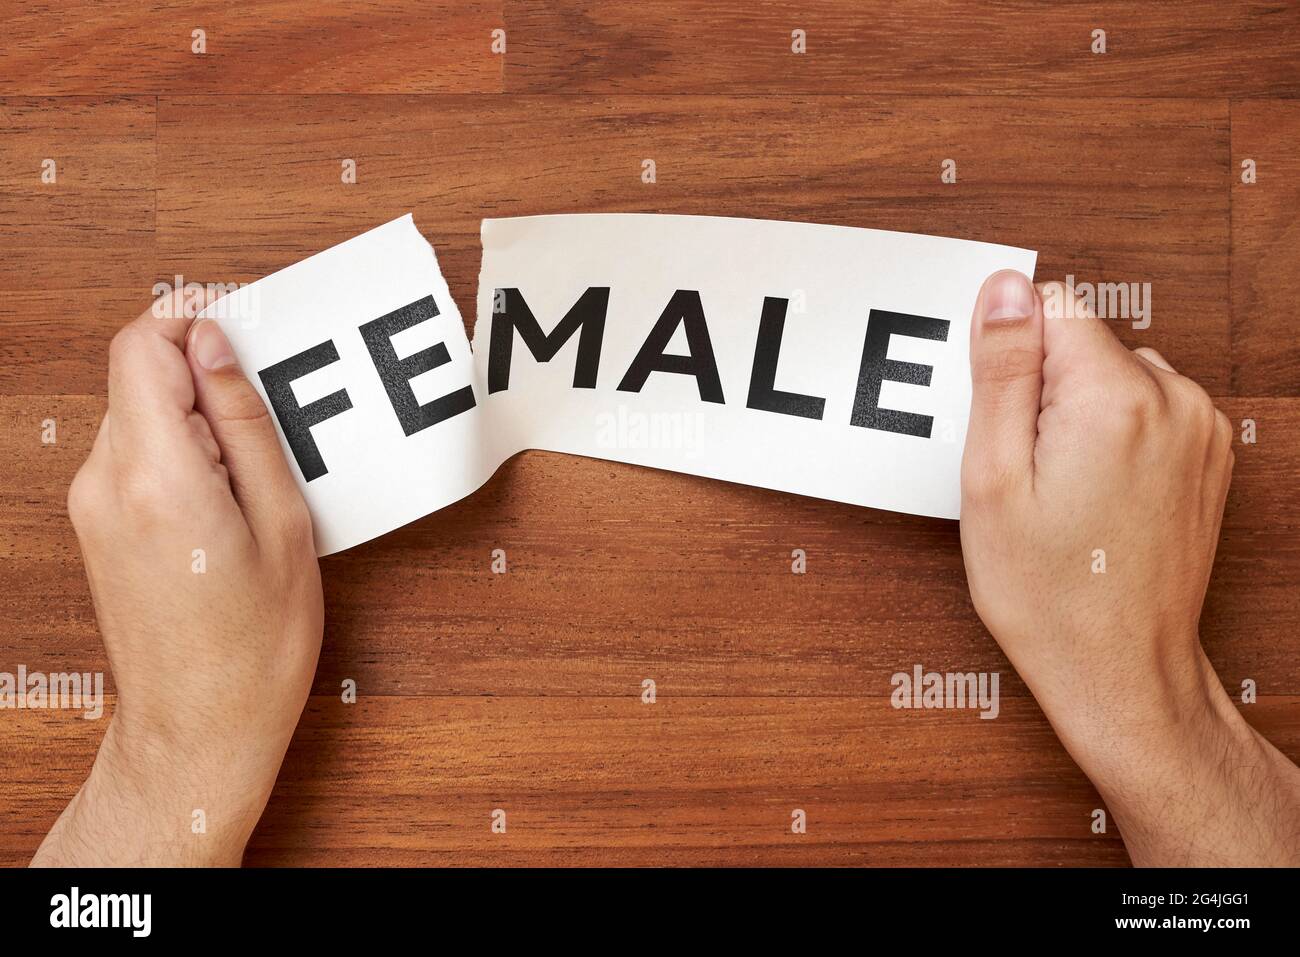 Hands tearing the word female, leaving male. Conceptual image about gender identity and transgender. Wood background. Stock Photo